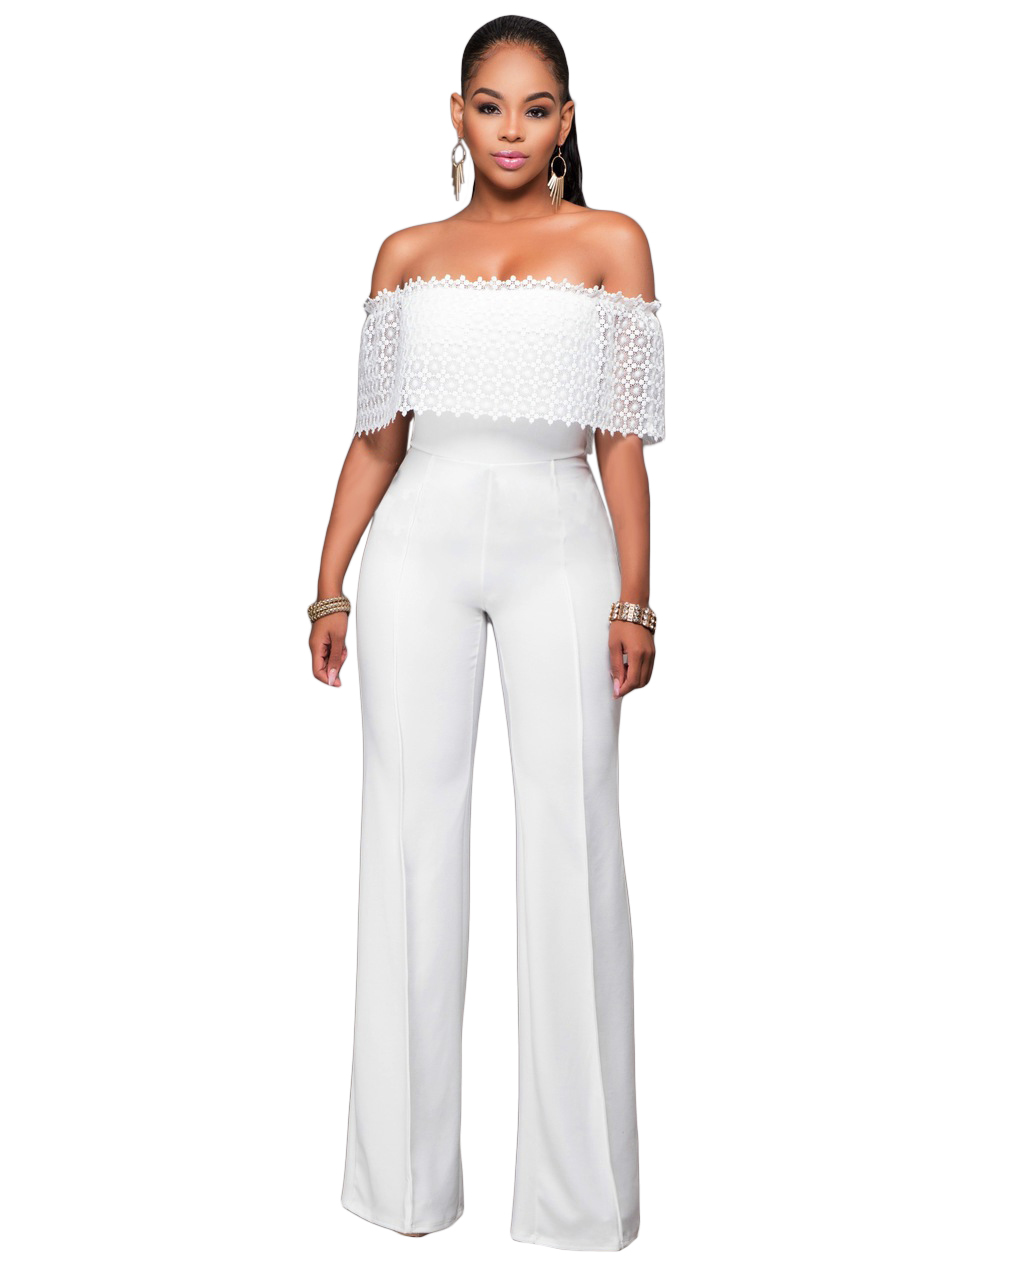 White Lace Up Ruffle Overlay Strapless Jumpsuit